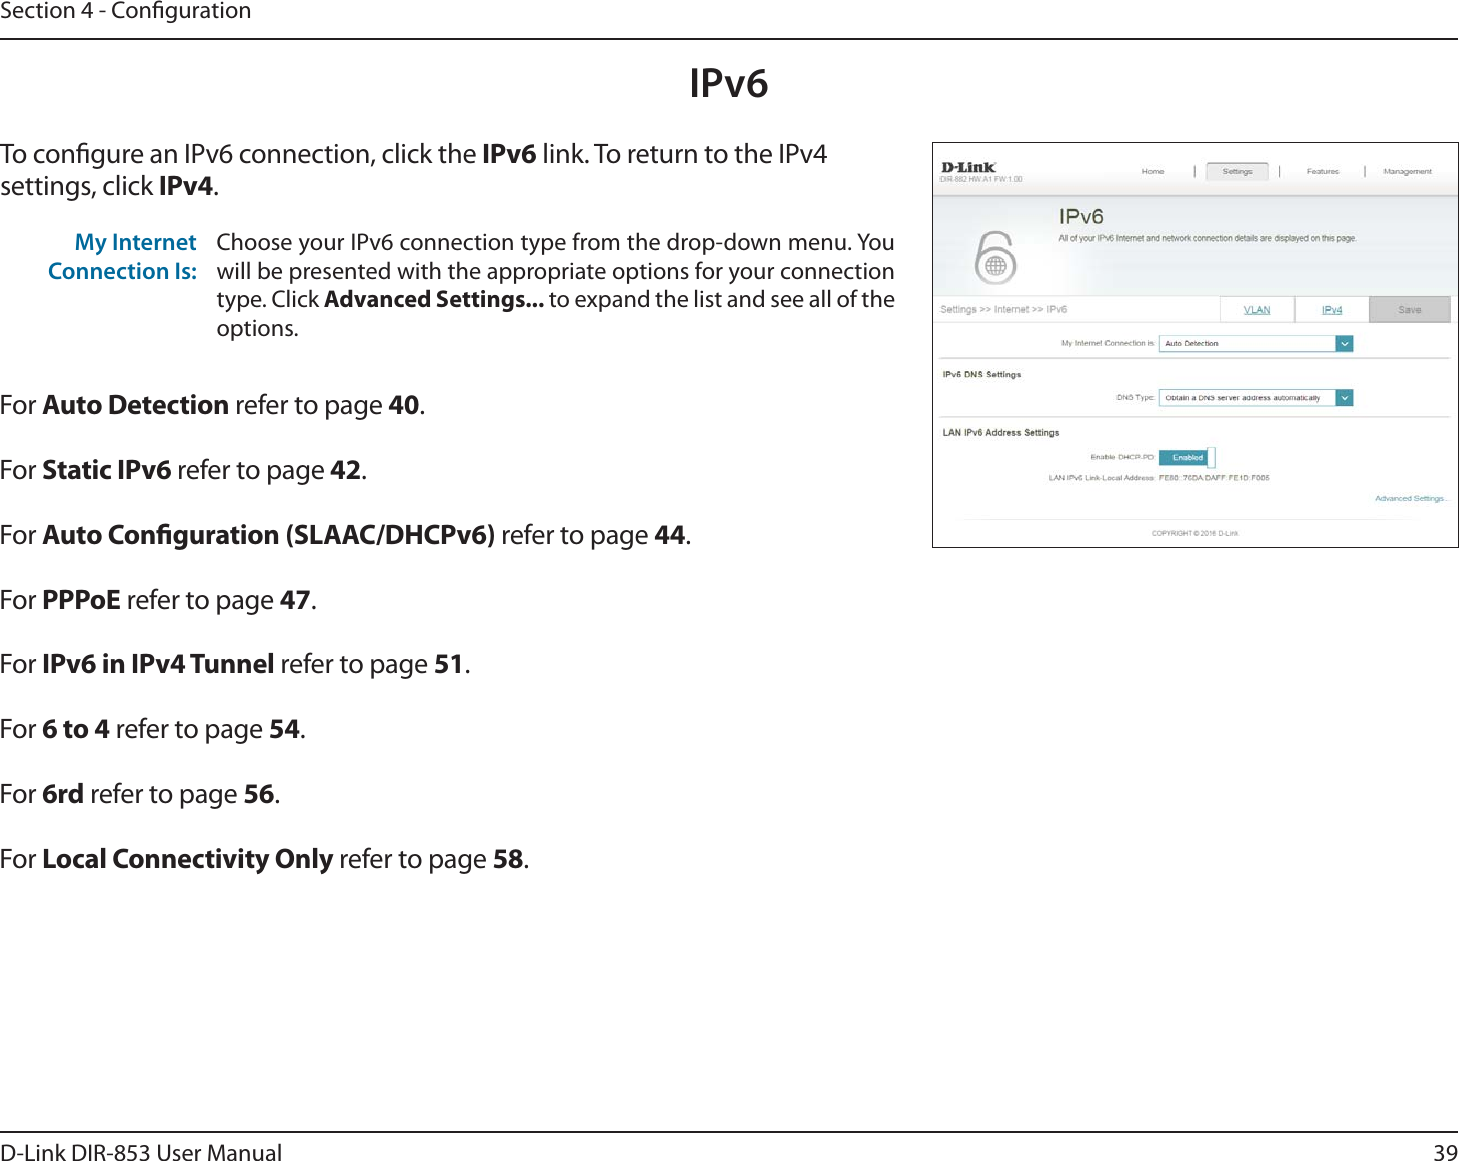 39D-Link DIR-853 User ManualSection 4 - CongurationIPv6To congure an IPv6 connection, click the IPv6 link. To return to the IPv4 settings, click IPv4.For Auto Detection refer to page 40.For Static IPv6 refer to page 42.For Auto Conguration (SLAAC/DHCPv6) refer to page 44.For PPPoE refer to page 47.For IPv6 in IPv4 Tunnel refer to page 51.For 6 to 4 refer to page 54.For 6rd refer to page 56.For Local Connectivity Only refer to page 58.My Internet Connection Is:Choose your IPv6 connection type from the drop-down menu. You will be presented with the appropriate options for your connection type. Click Advanced Settings... to expand the list and see all of the options.